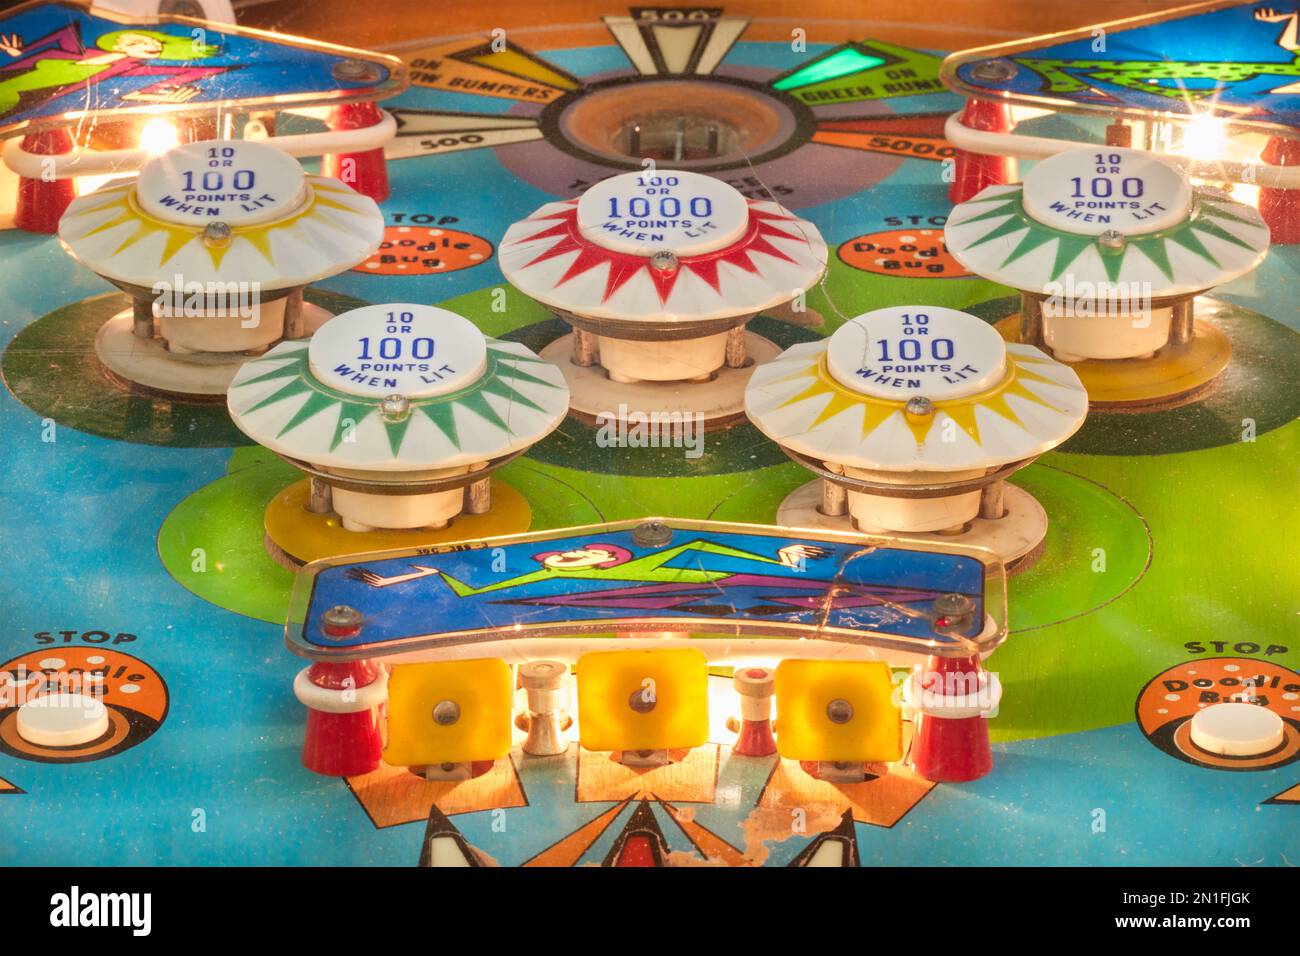 Drempt, The Netherlands - September 3, 2021: Close up of a vintage illuminated pinball machine in Drempt, The Netherlands Stock Photo